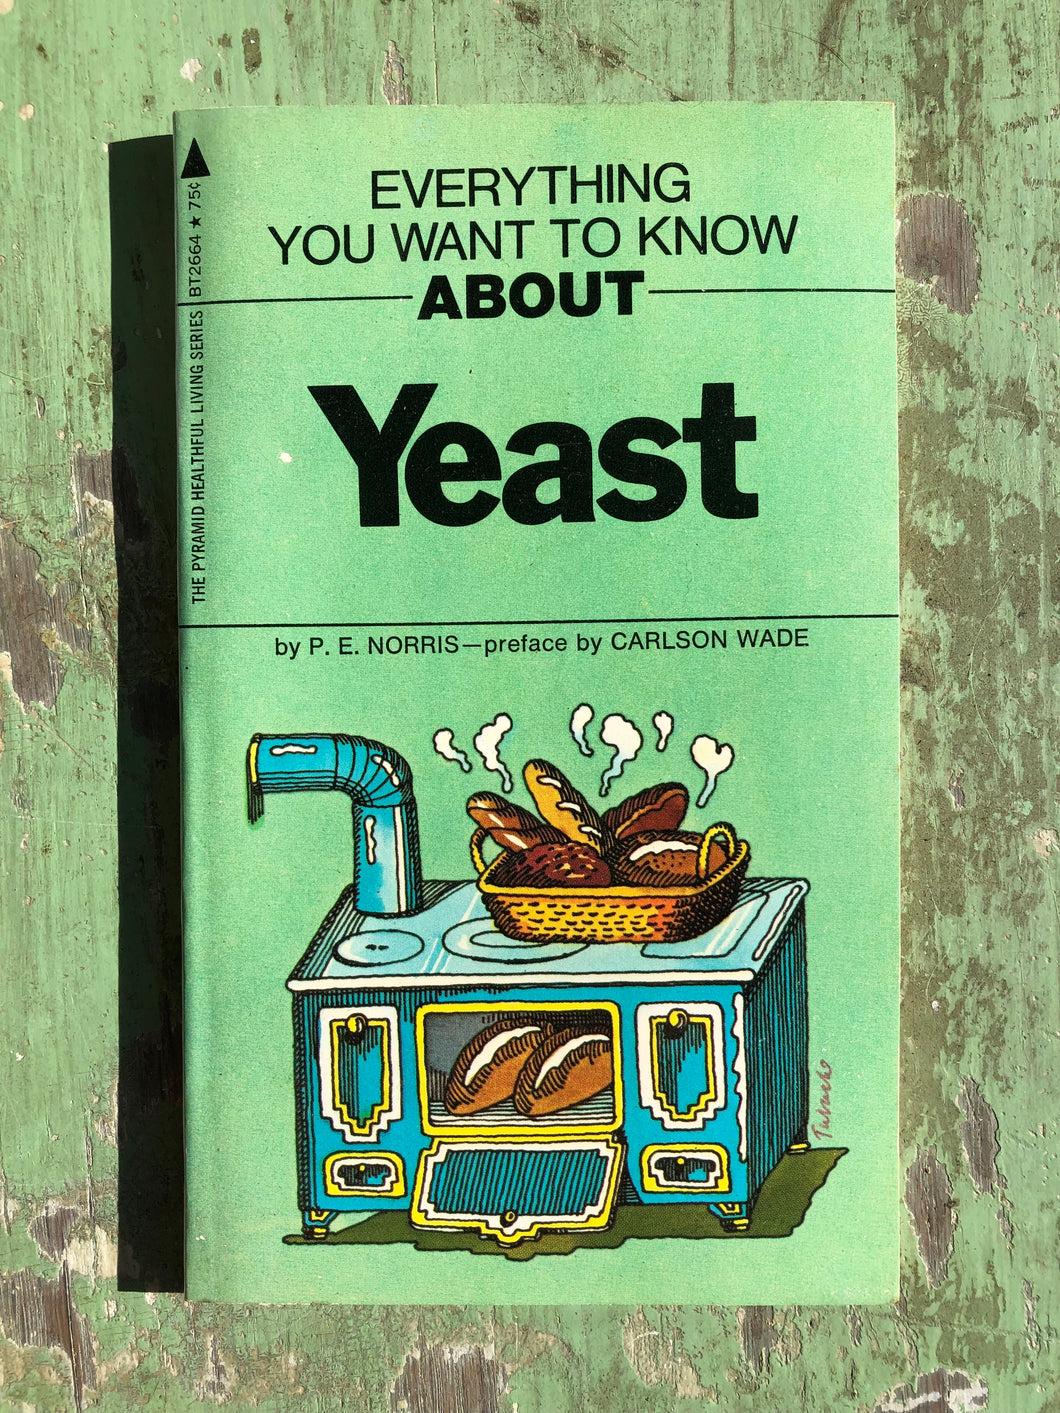 Everything You Want to Know About Yeast. A Unique and Concentrated Natural Food. By P. E. Norris